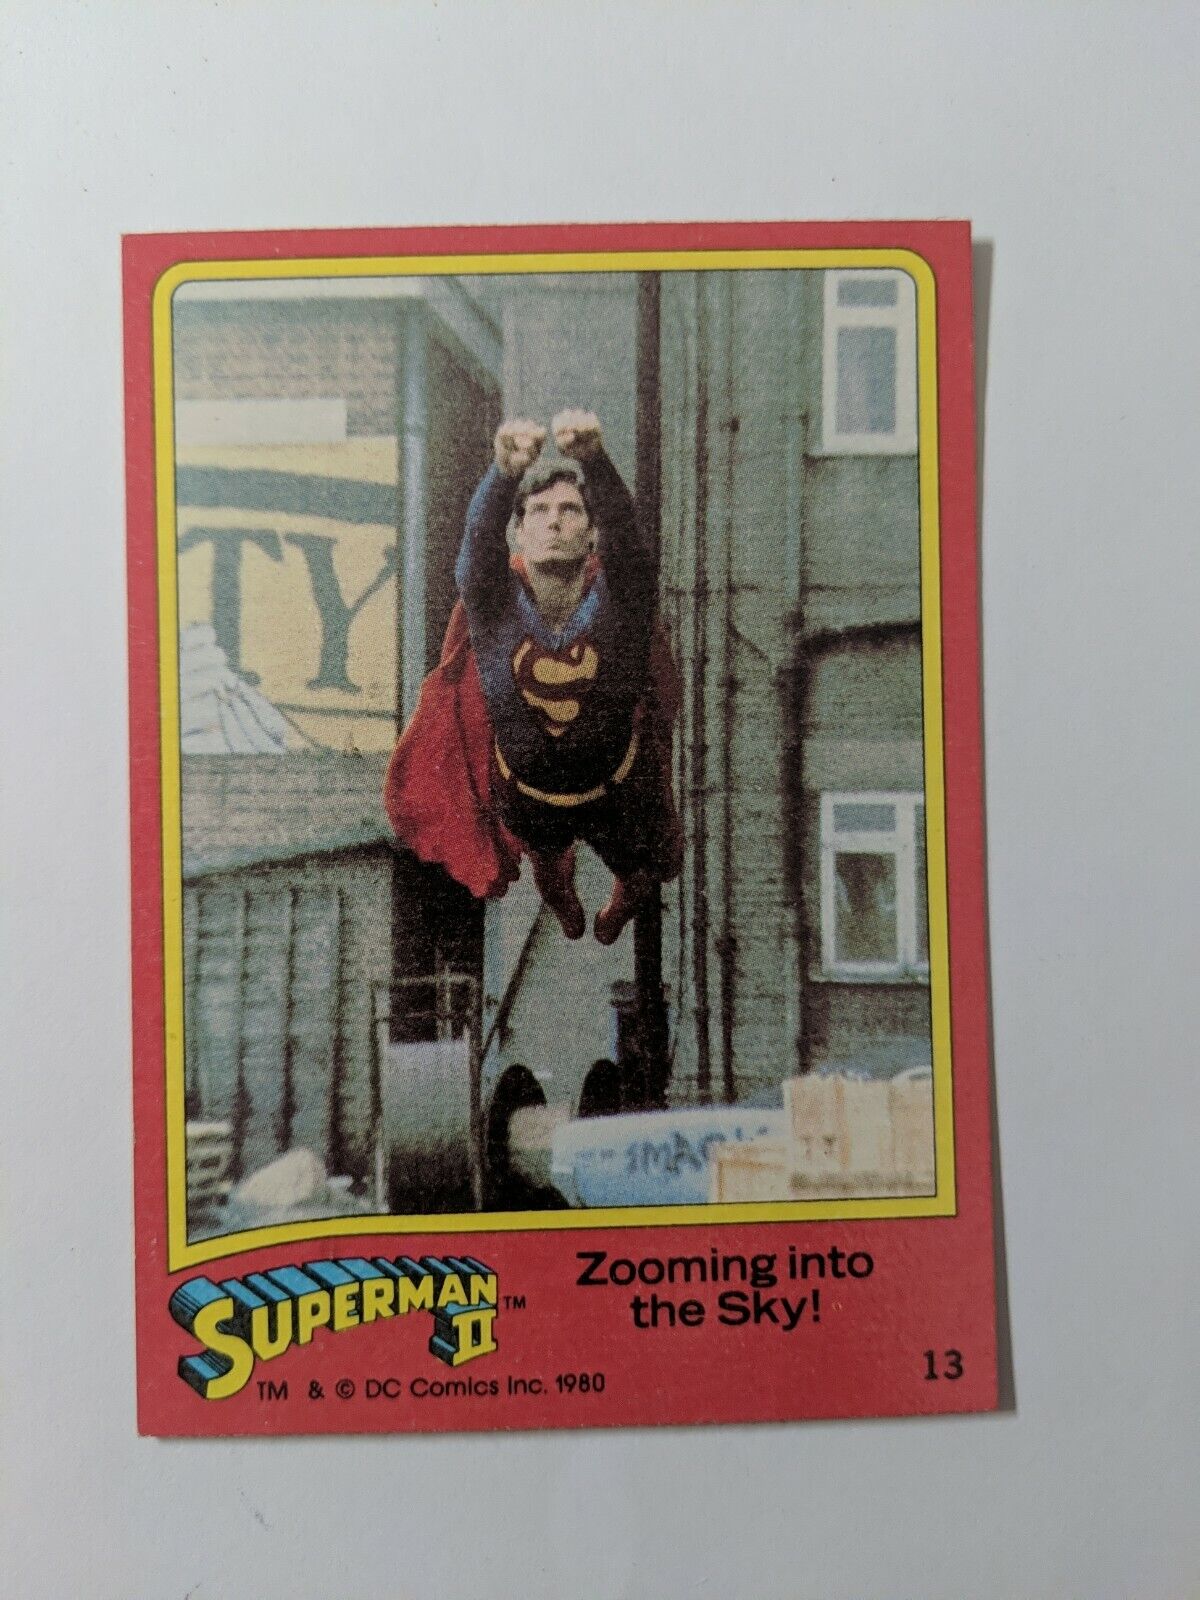 Superman 2 trading card #13 (1980, Topps) 